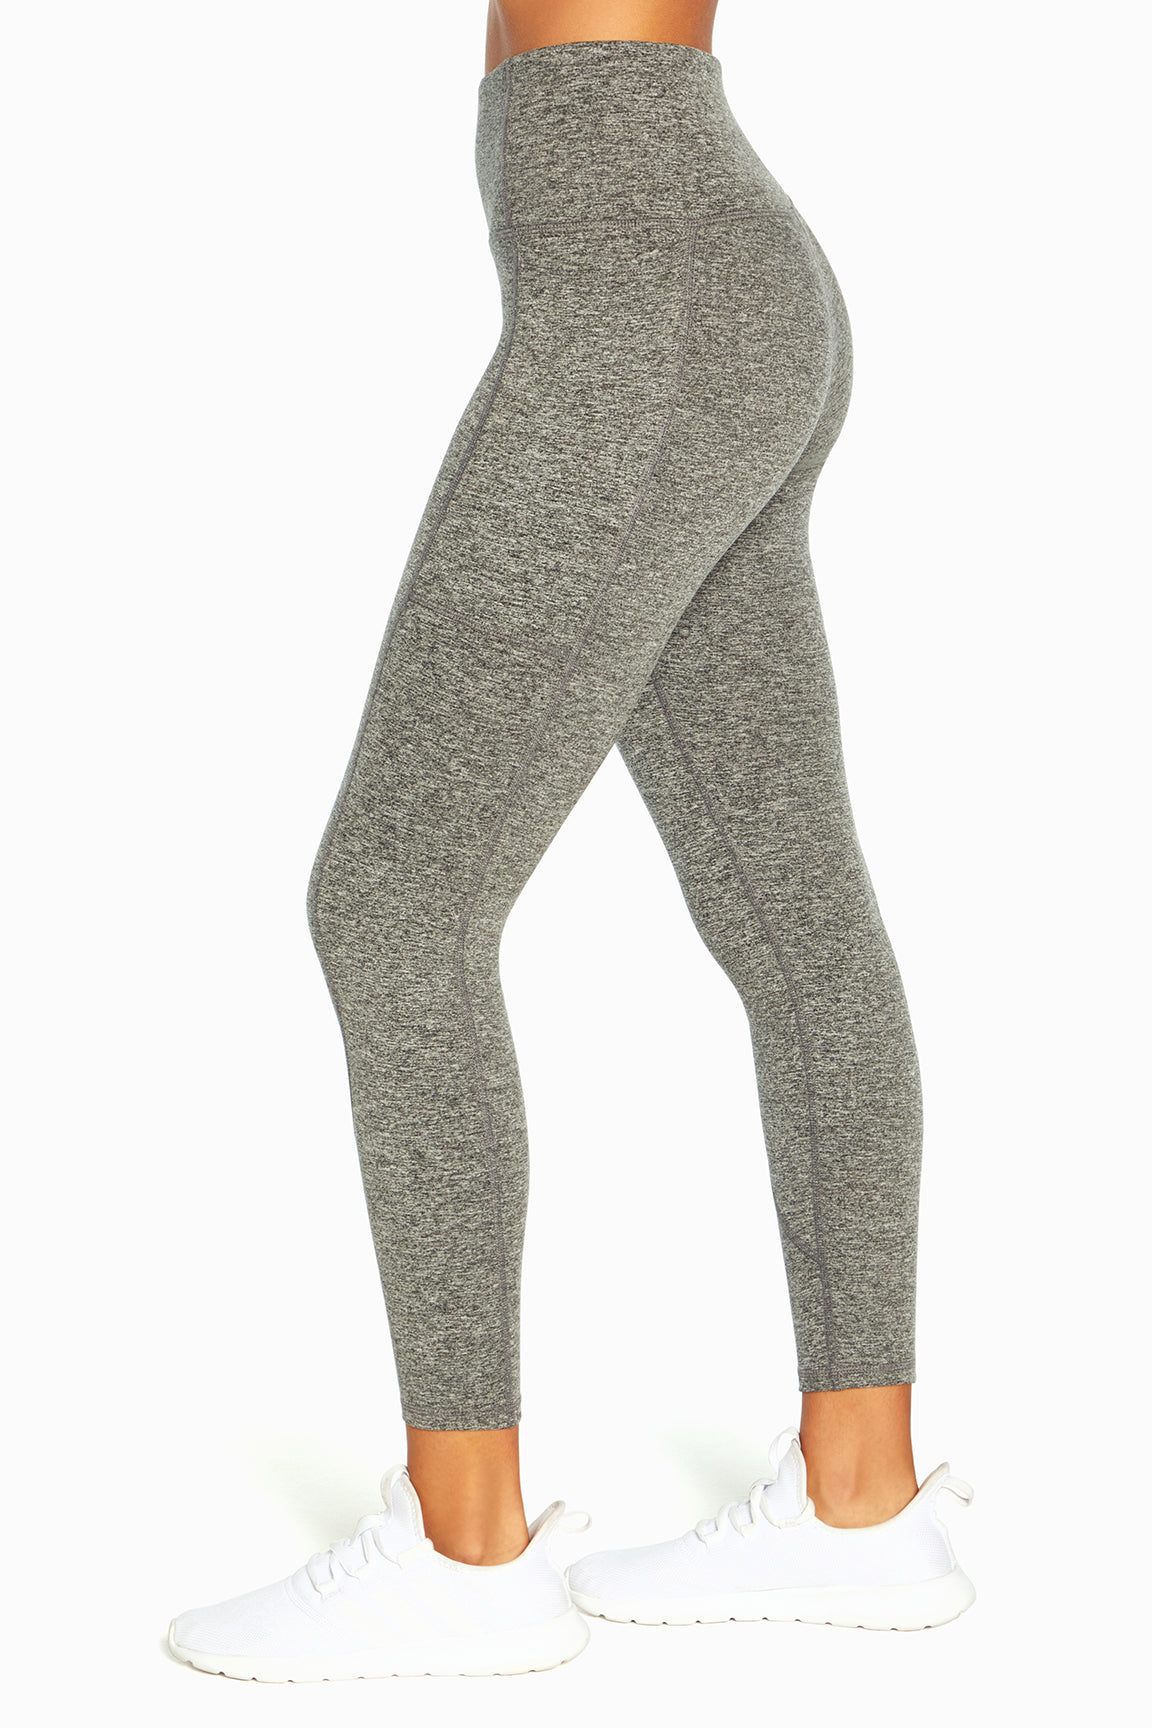 Athletic Leggings By Balance Collection Size: 1x – Clothes Mentor